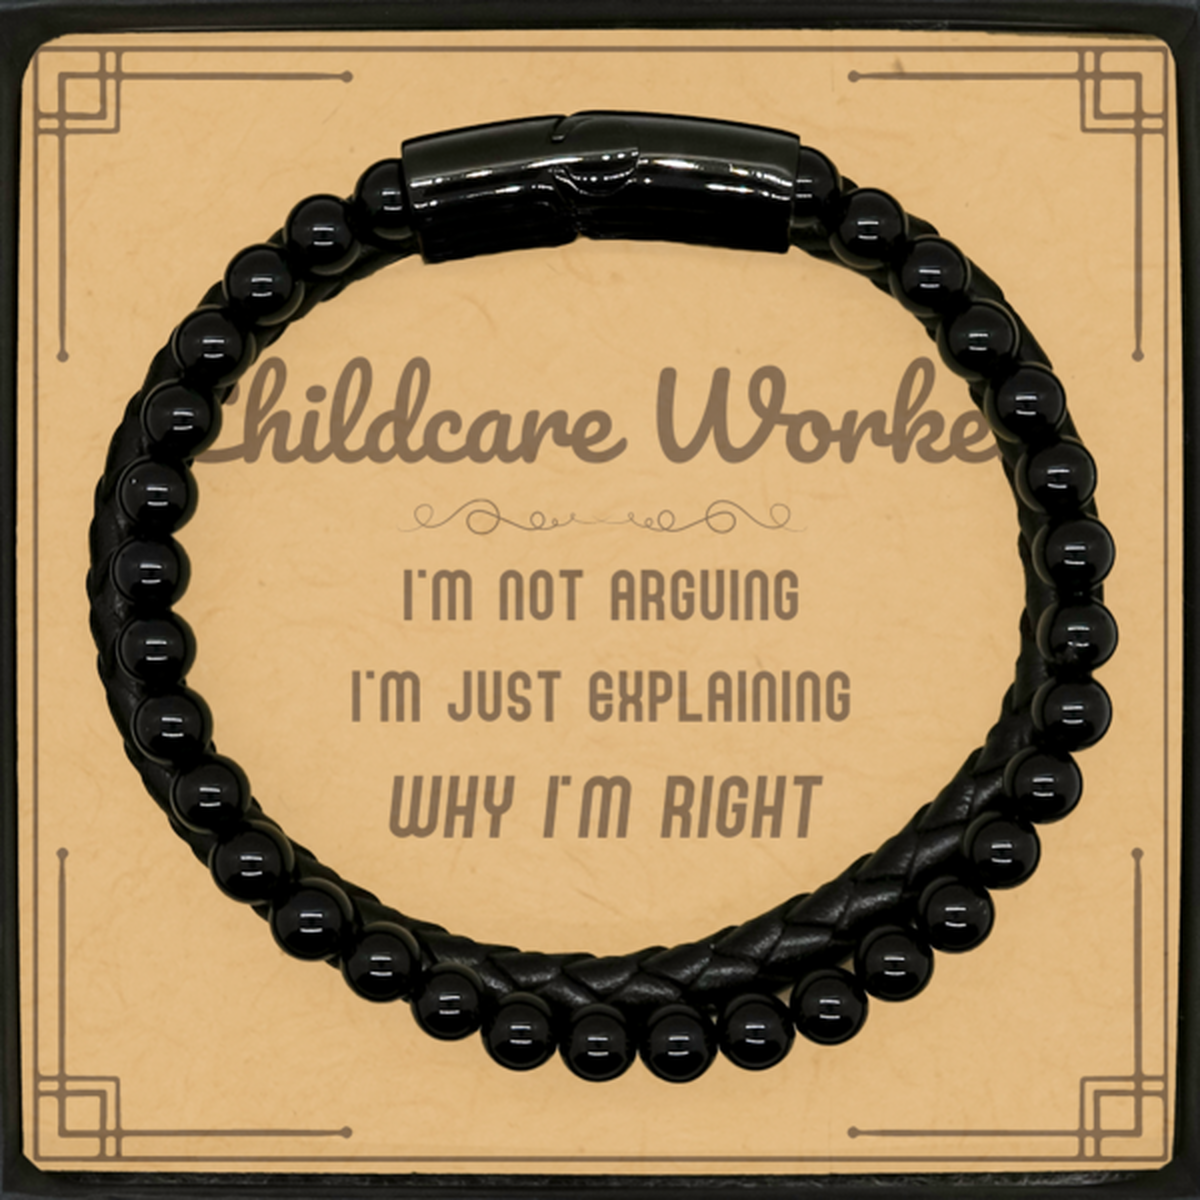 Childcare Worker I'm not Arguing. I'm Just Explaining Why I'm RIGHT Stone Leather Bracelets, Funny Saying Quote Childcare Worker Gifts For Childcare Worker Message Card Graduation Birthday Christmas Gifts for Men Women Coworker